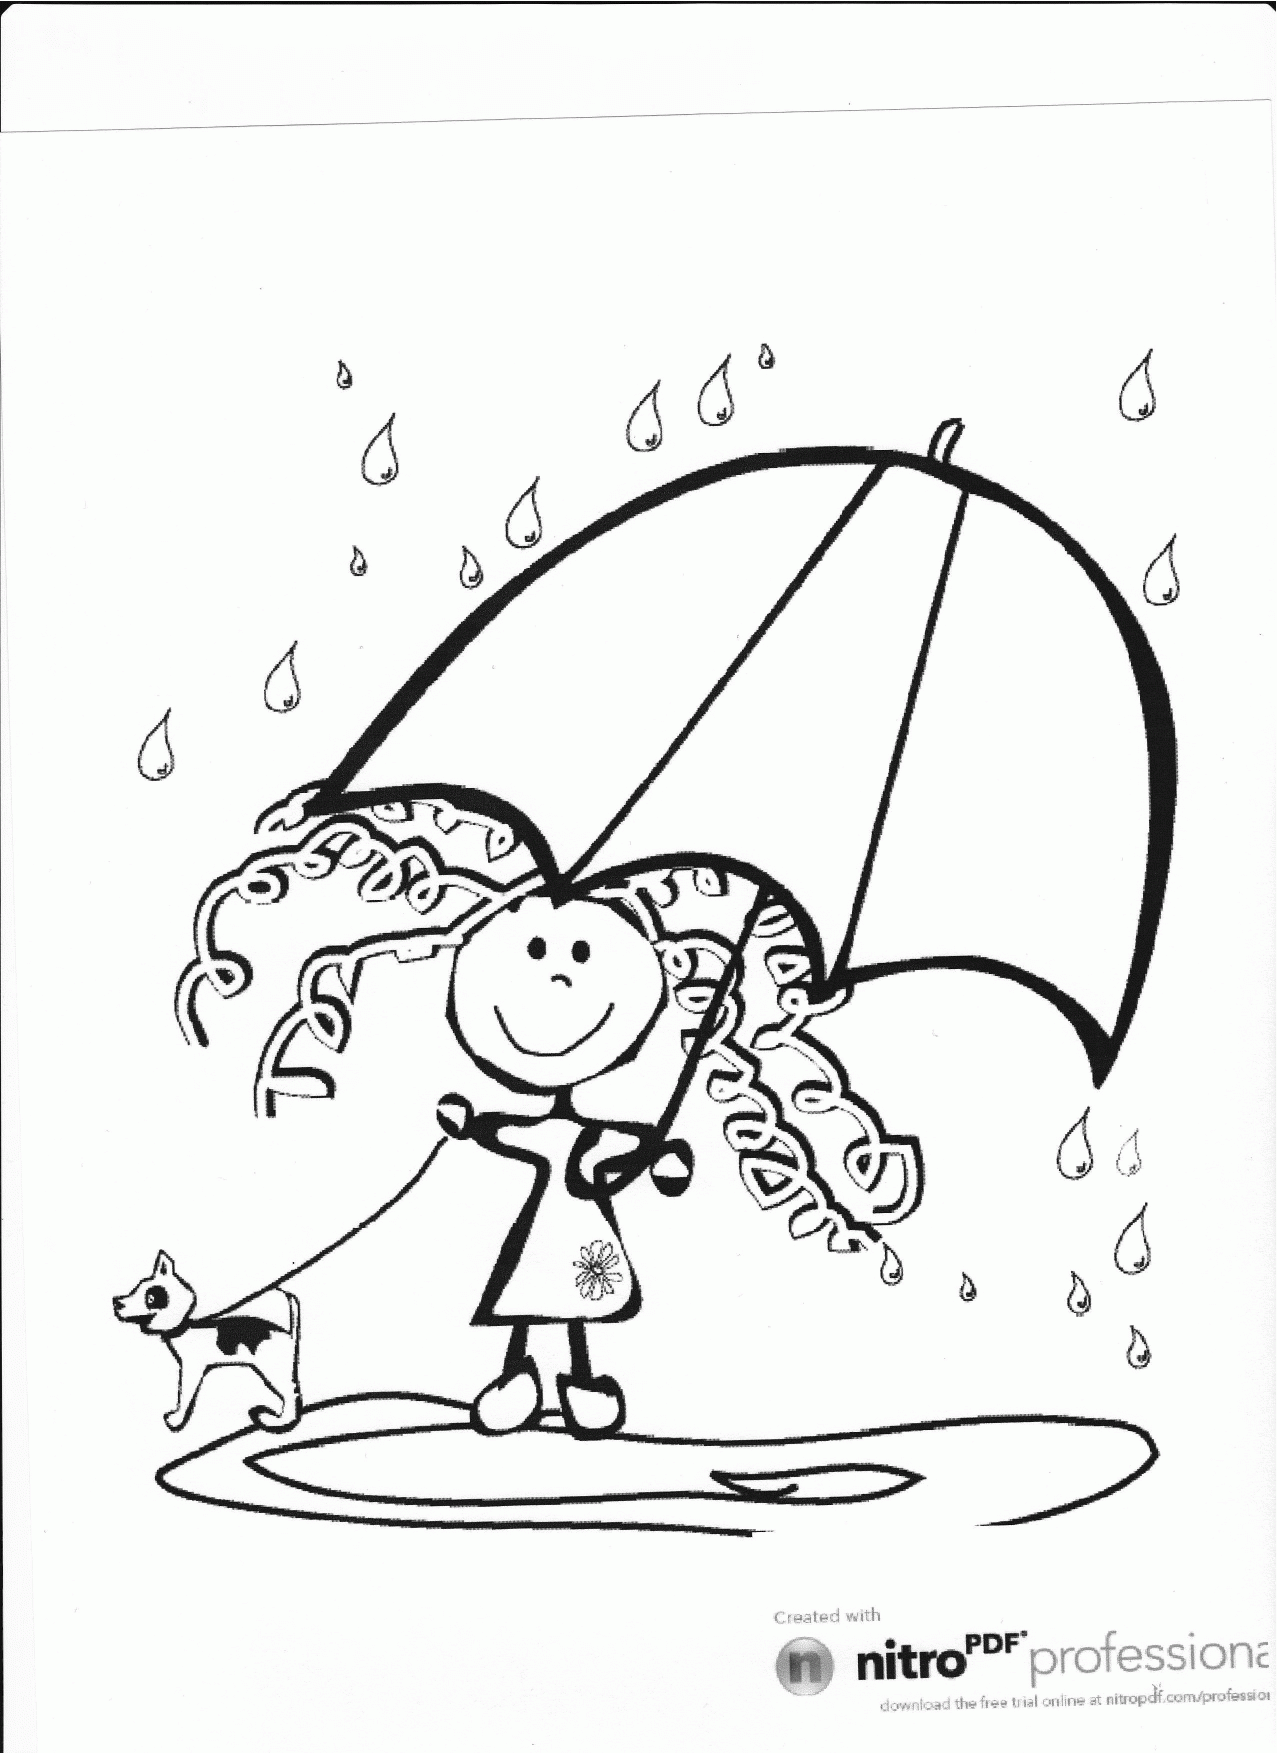 9 Pics of Rainy Day Duck Coloring Pages - Rainy Day Coloring Pages ...